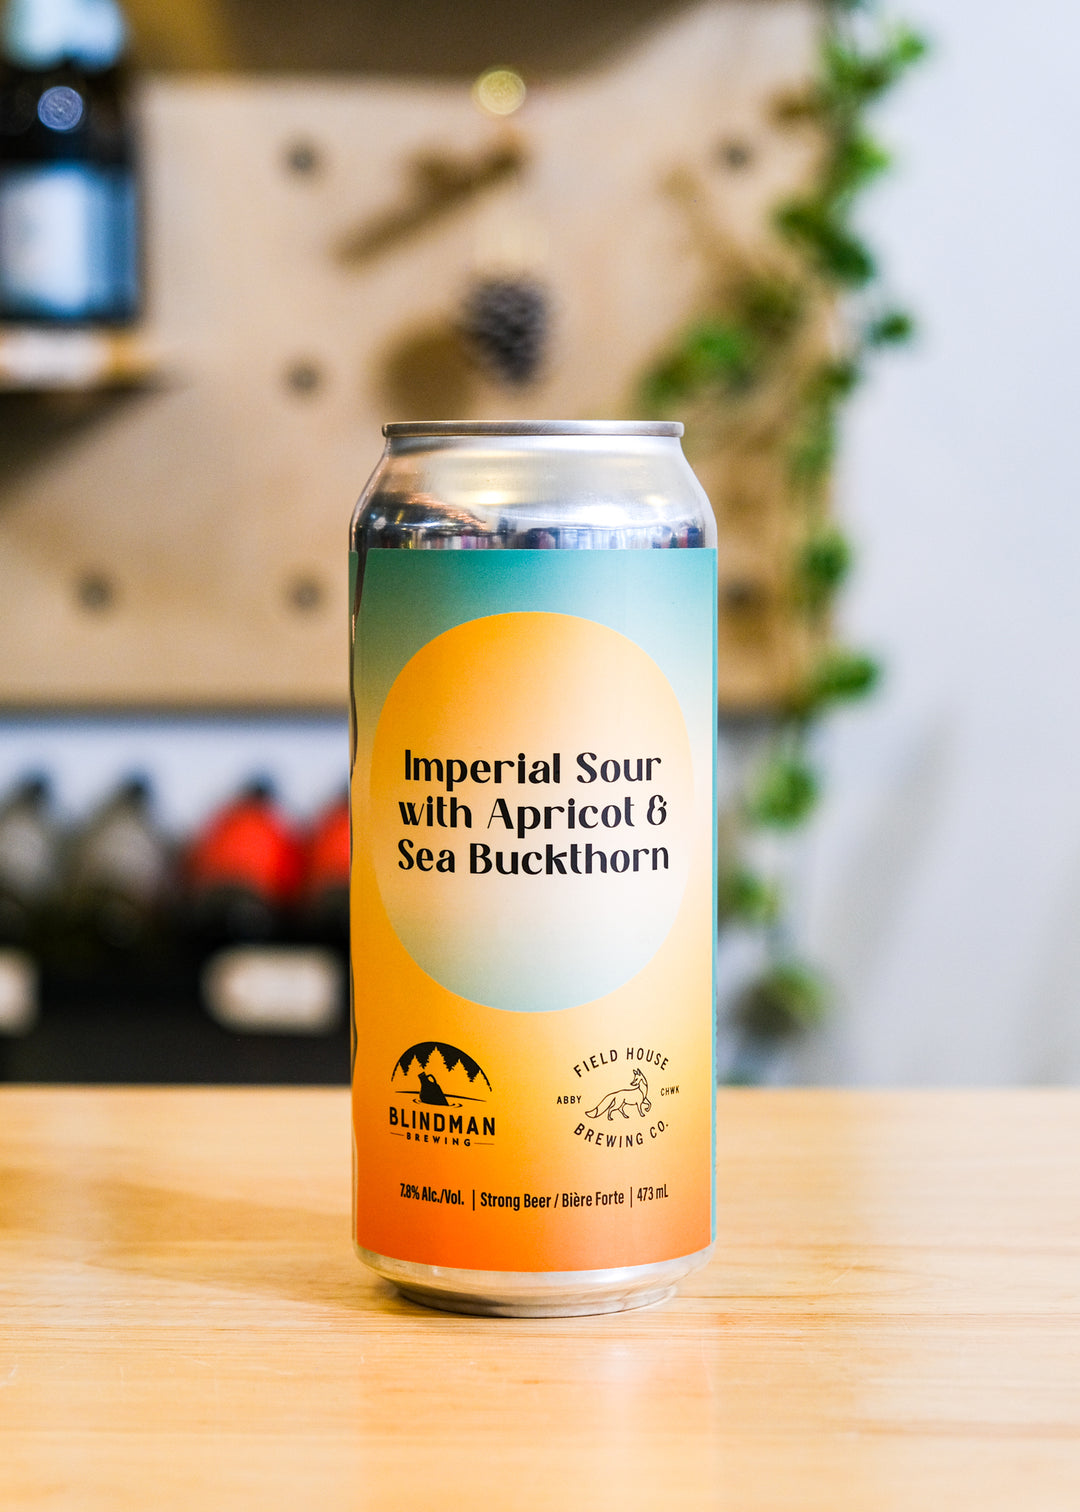 IMPERIAL SOUR WITH APRICOT & SEA BUCKTHORN